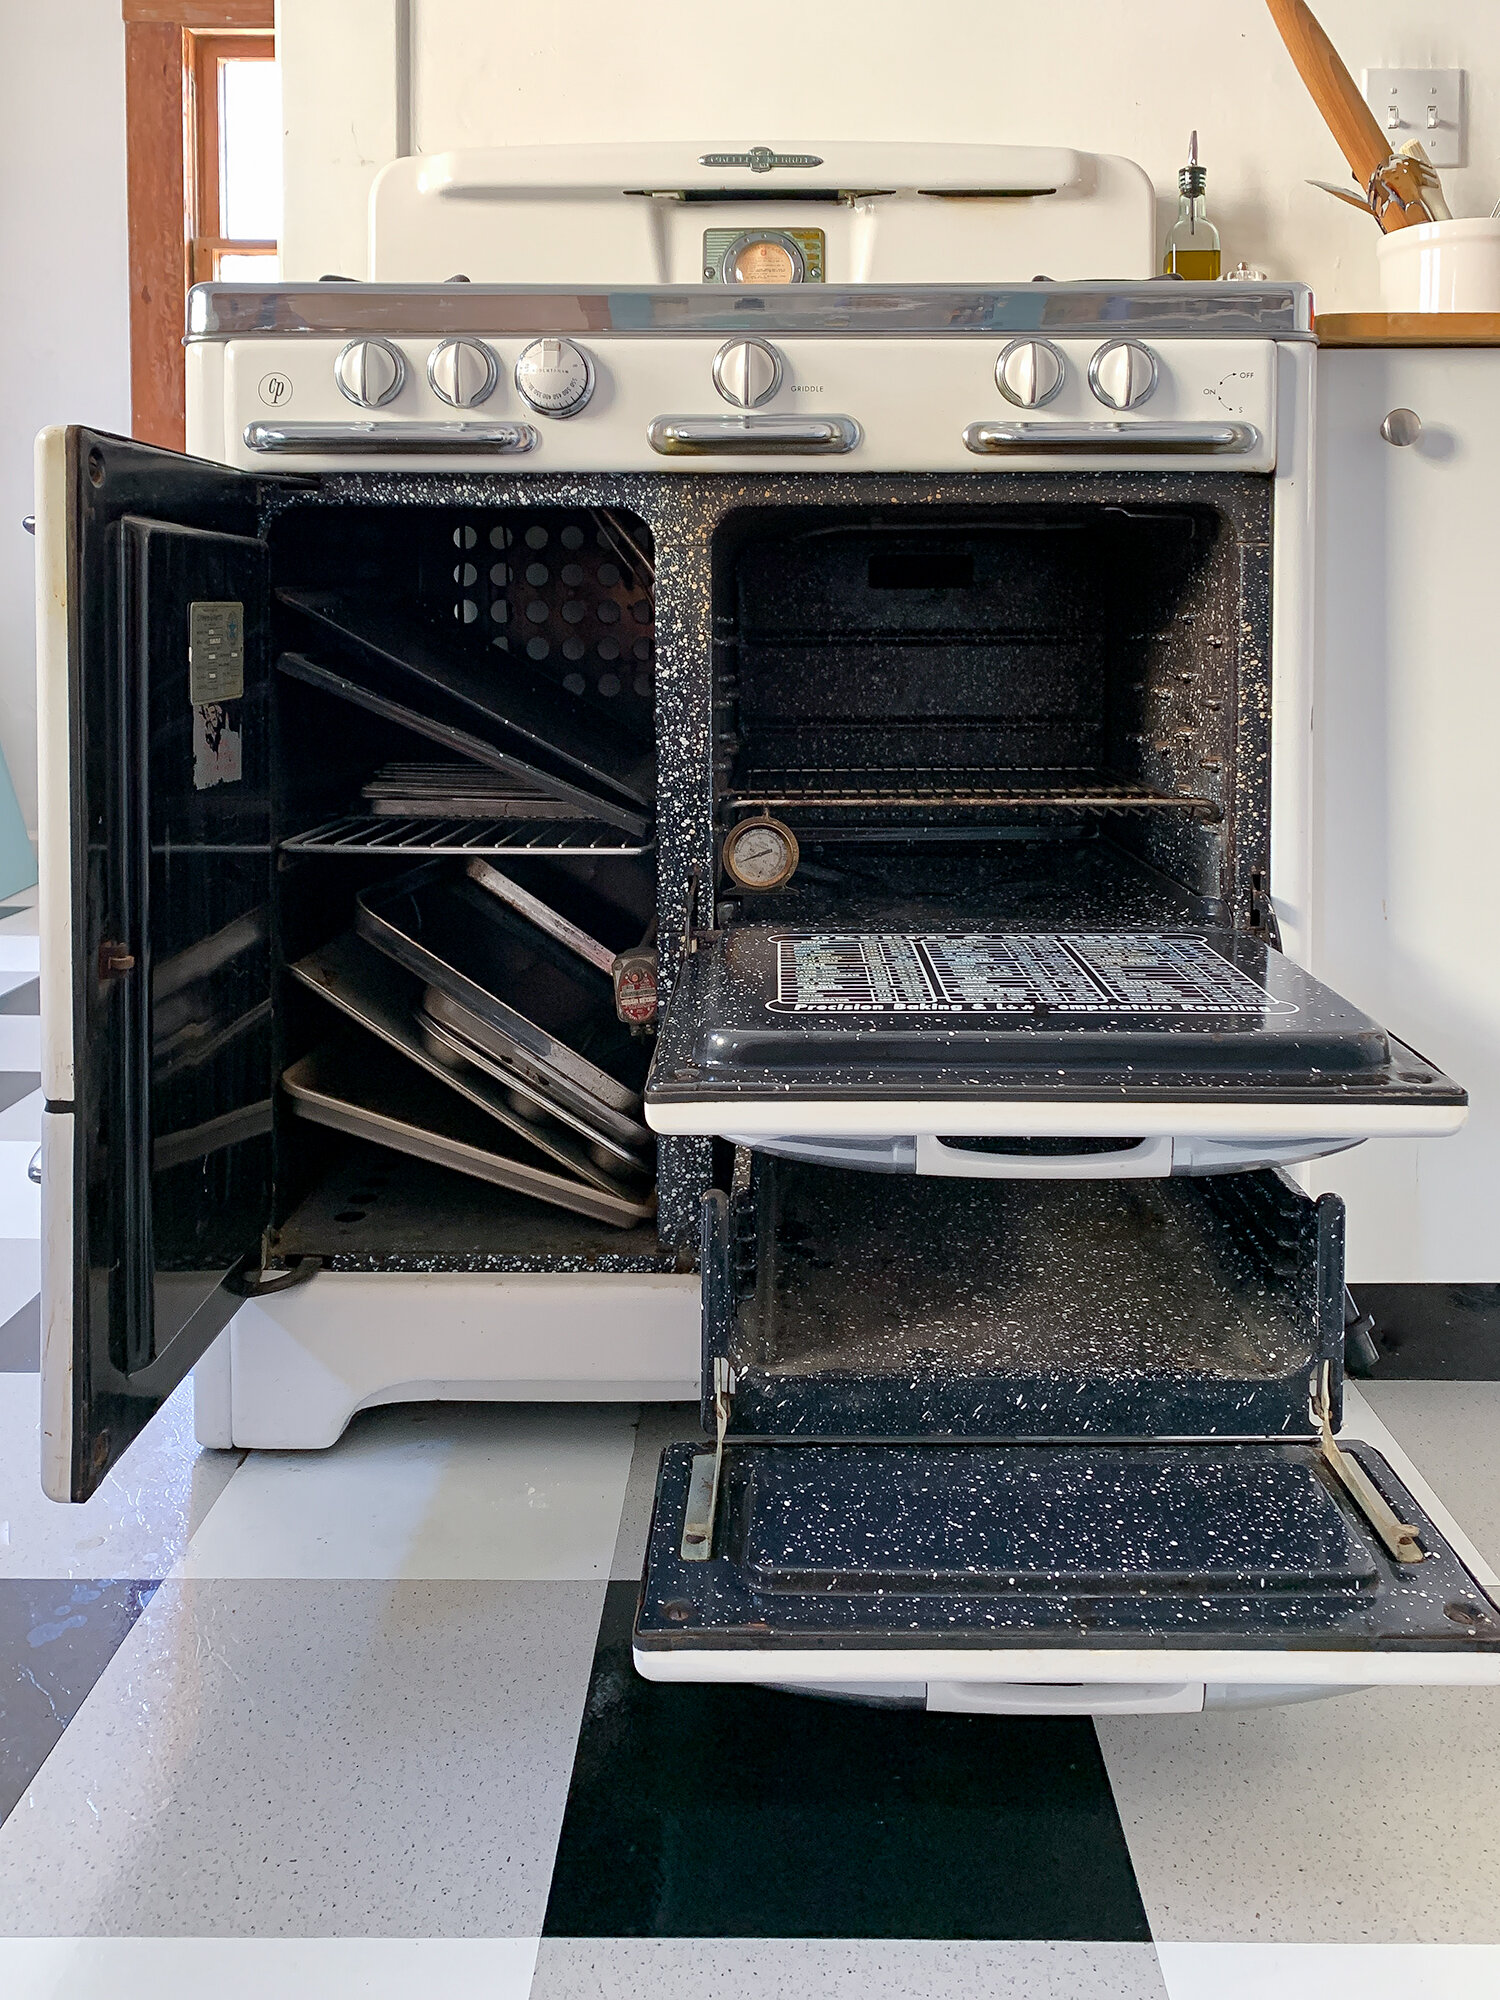 My Experience Living With A Vintage Stove The Pros